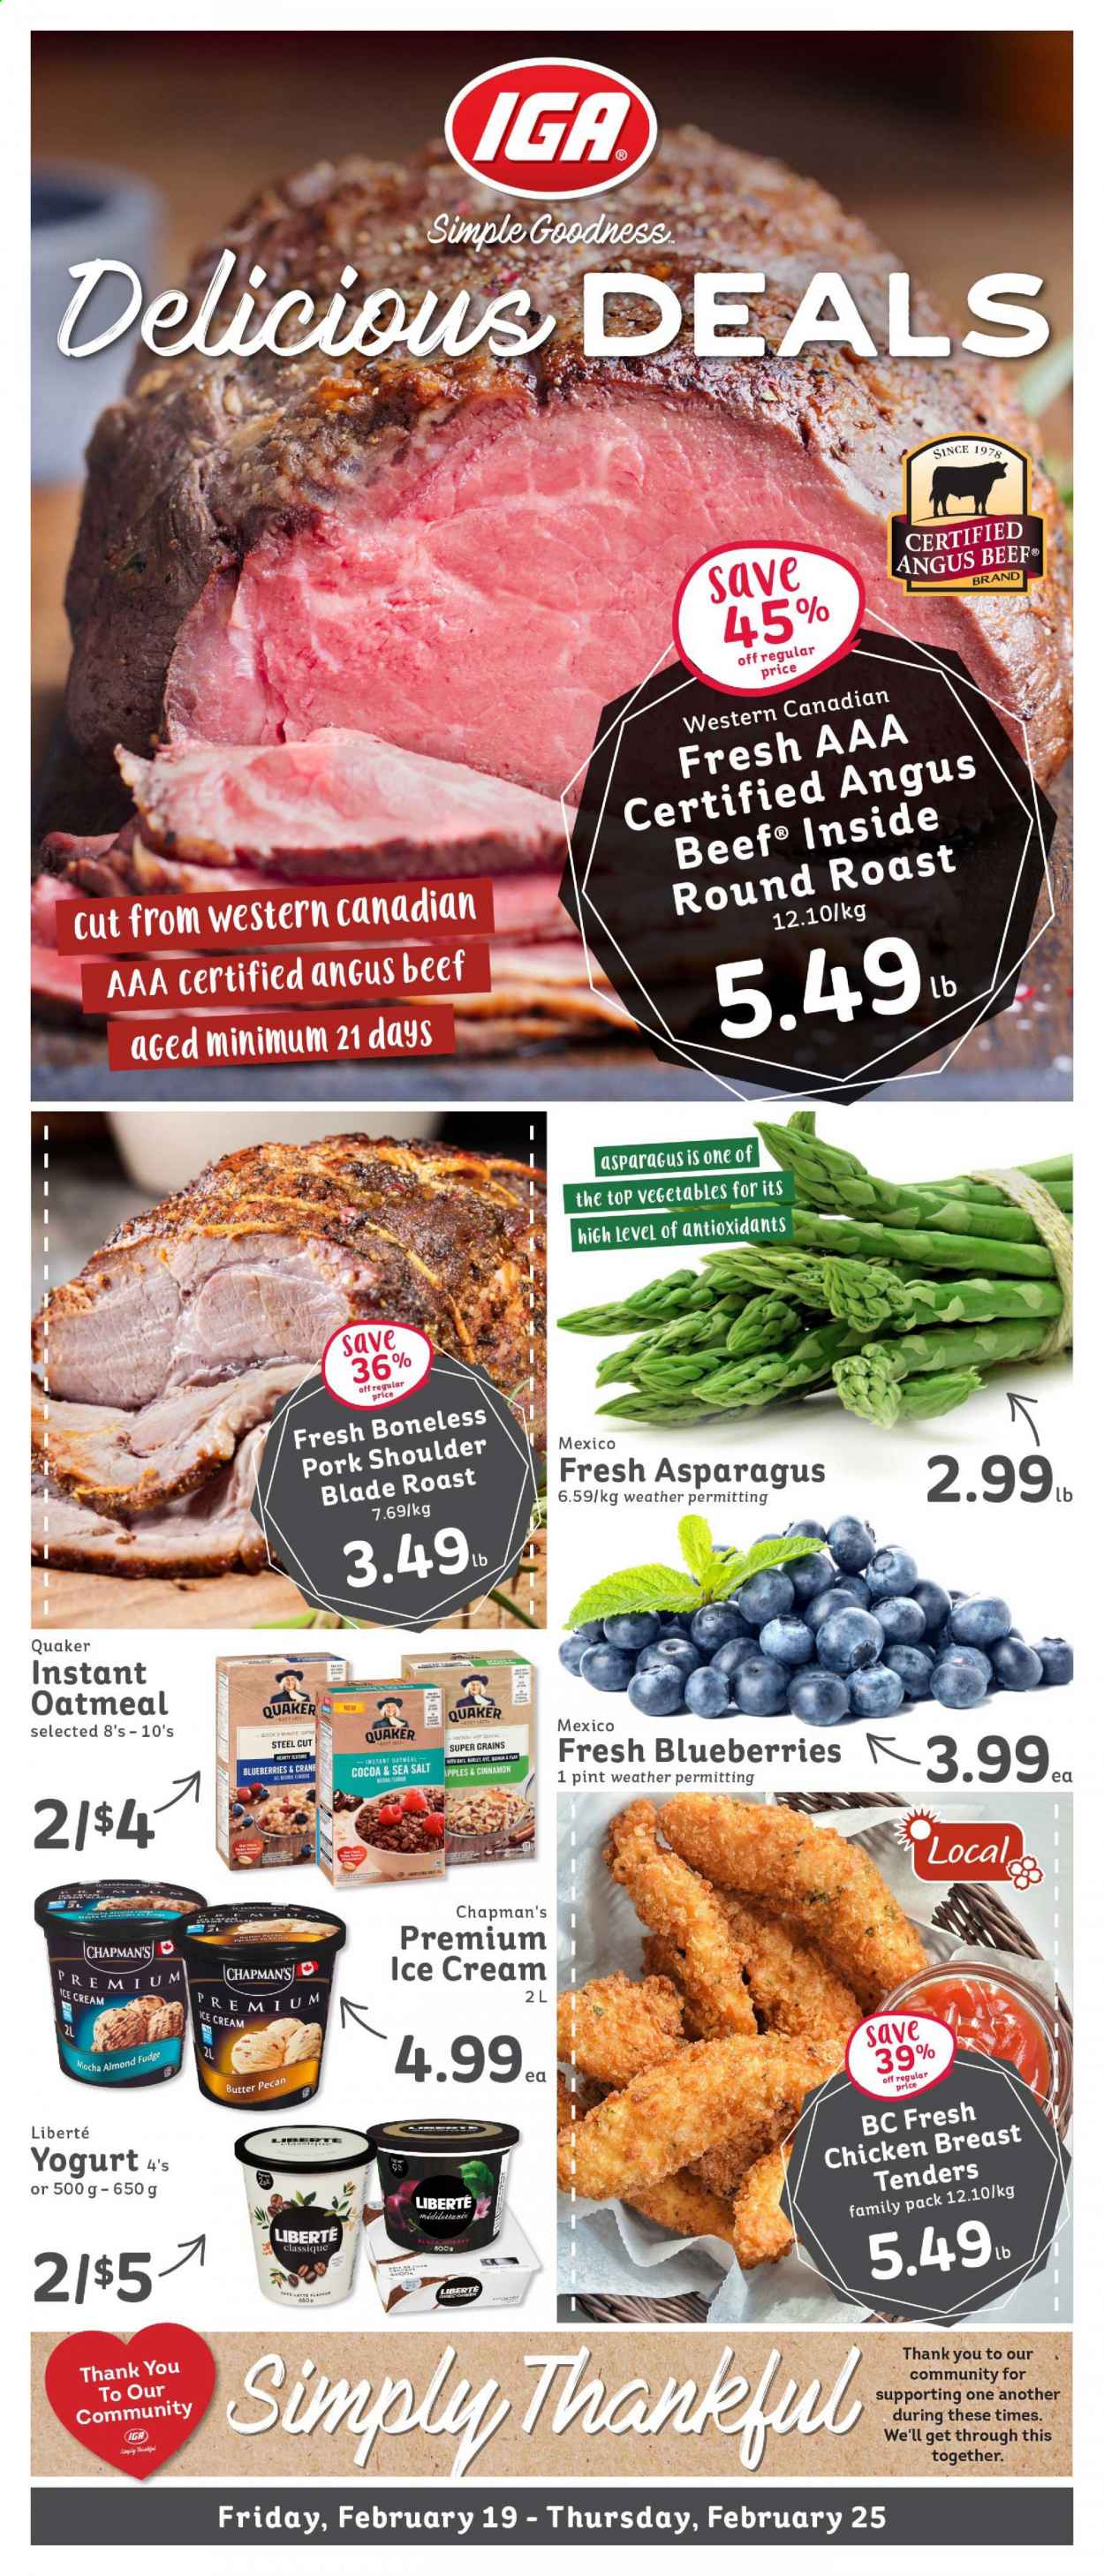 thumbnail - IGA Simple Goodness Flyer - February 19, 2021 - February 25, 2021 - Sales products - apples, blueberries, chicken tenders, Quaker, yoghurt, butter, ice cream, fudge, cocoa, oatmeal, cinnamon, chicken, beef meat, round roast, pork meat, pork shoulder. Page 1.